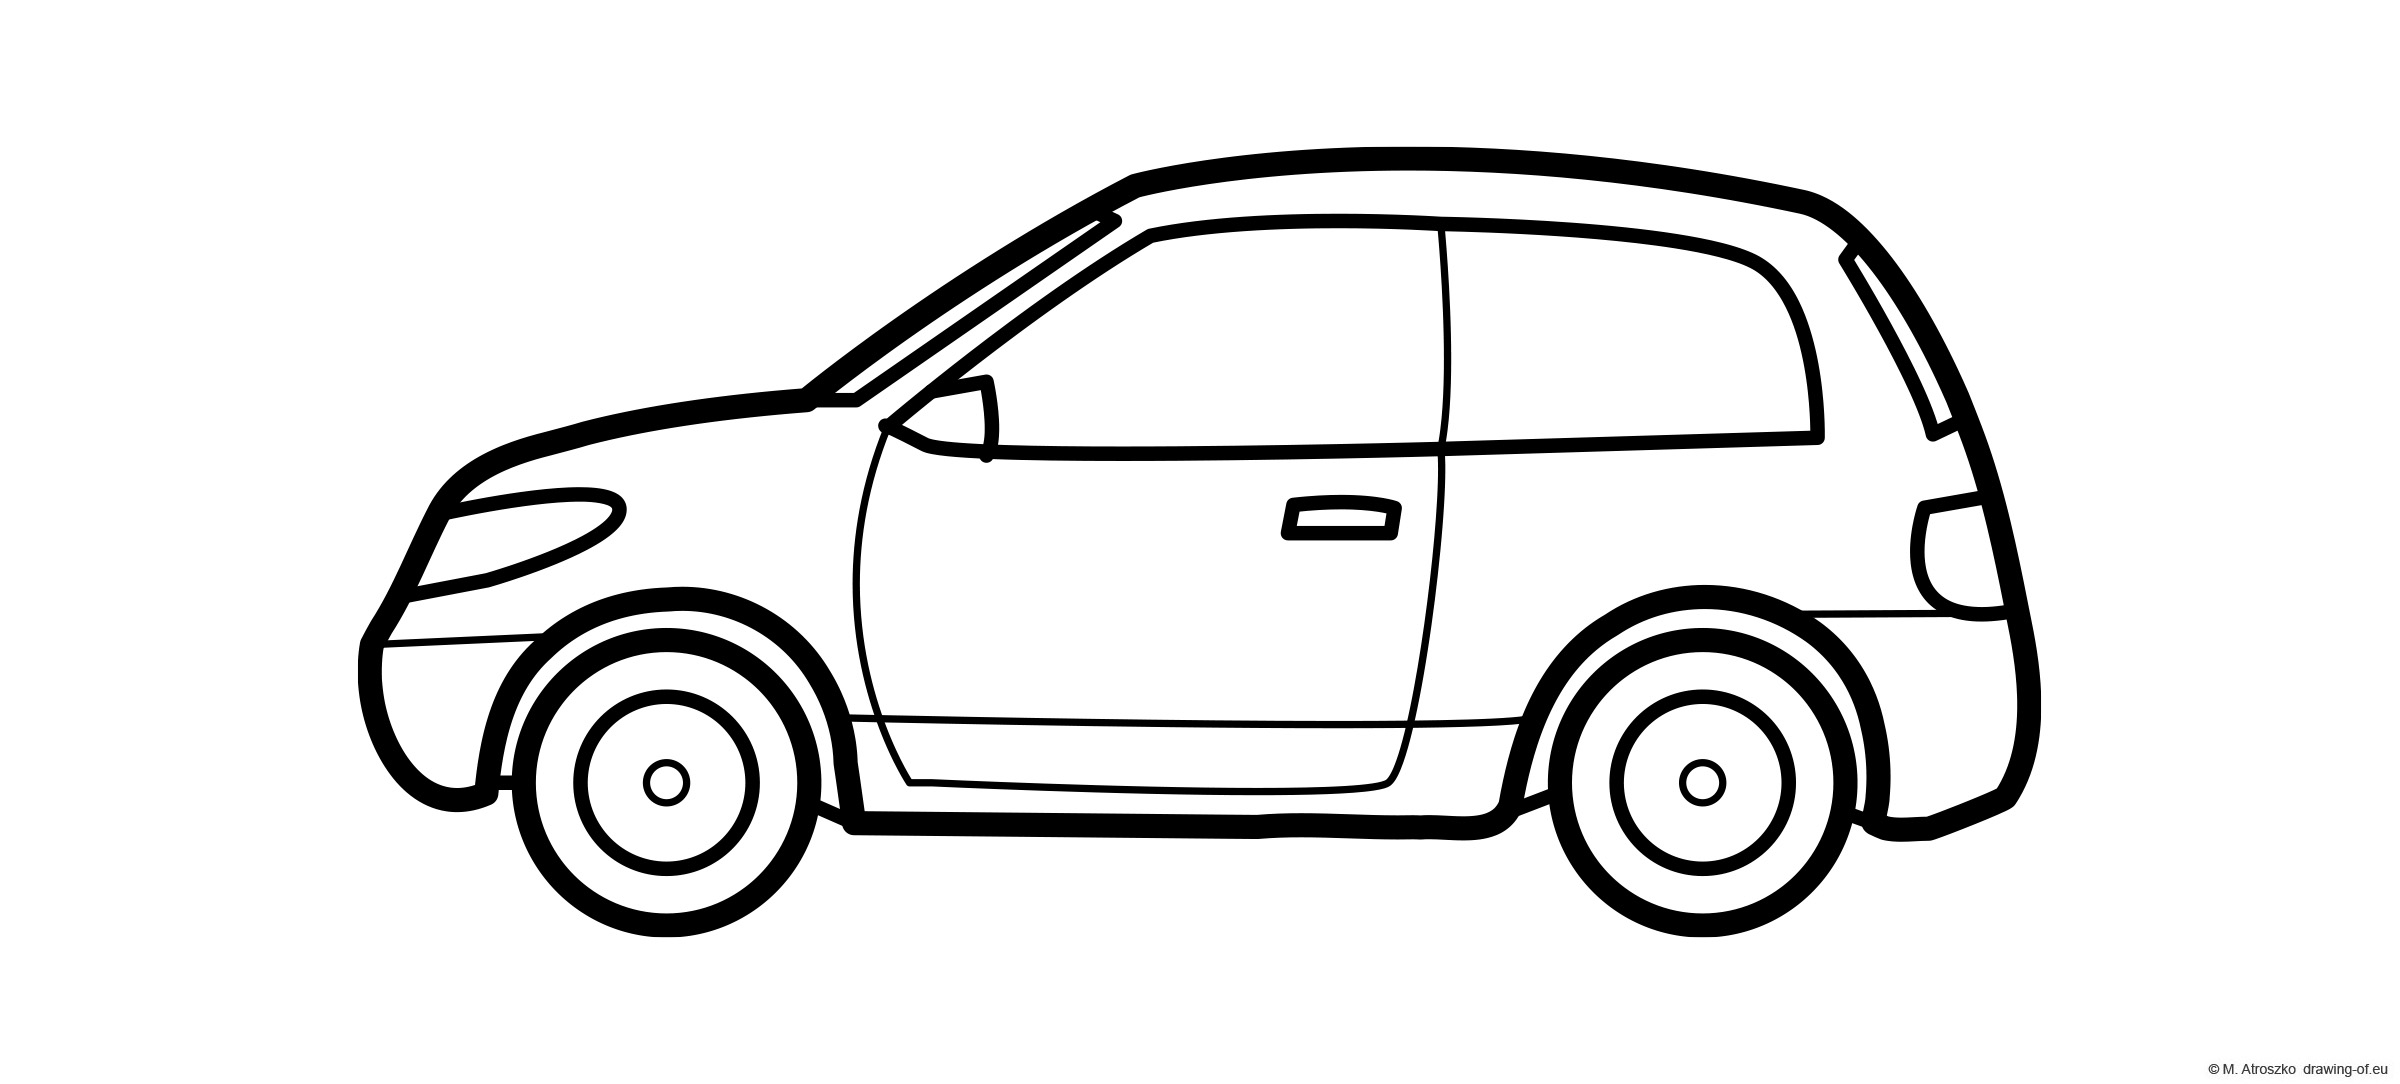 Small car coloring page